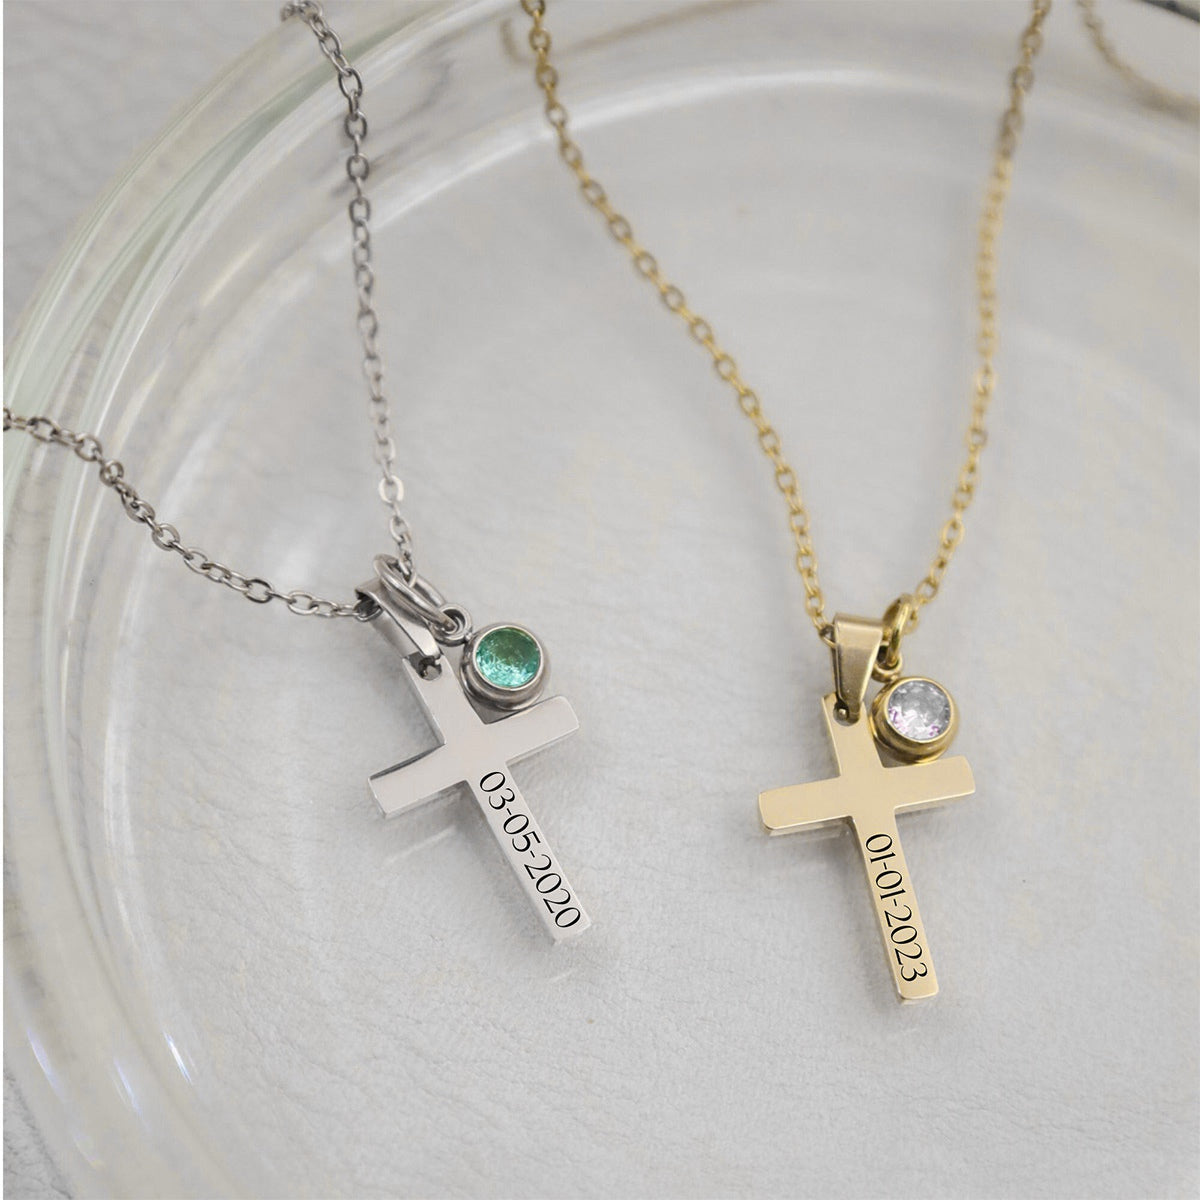 Personalized cross necklace with birthstone, confirmation gift for her